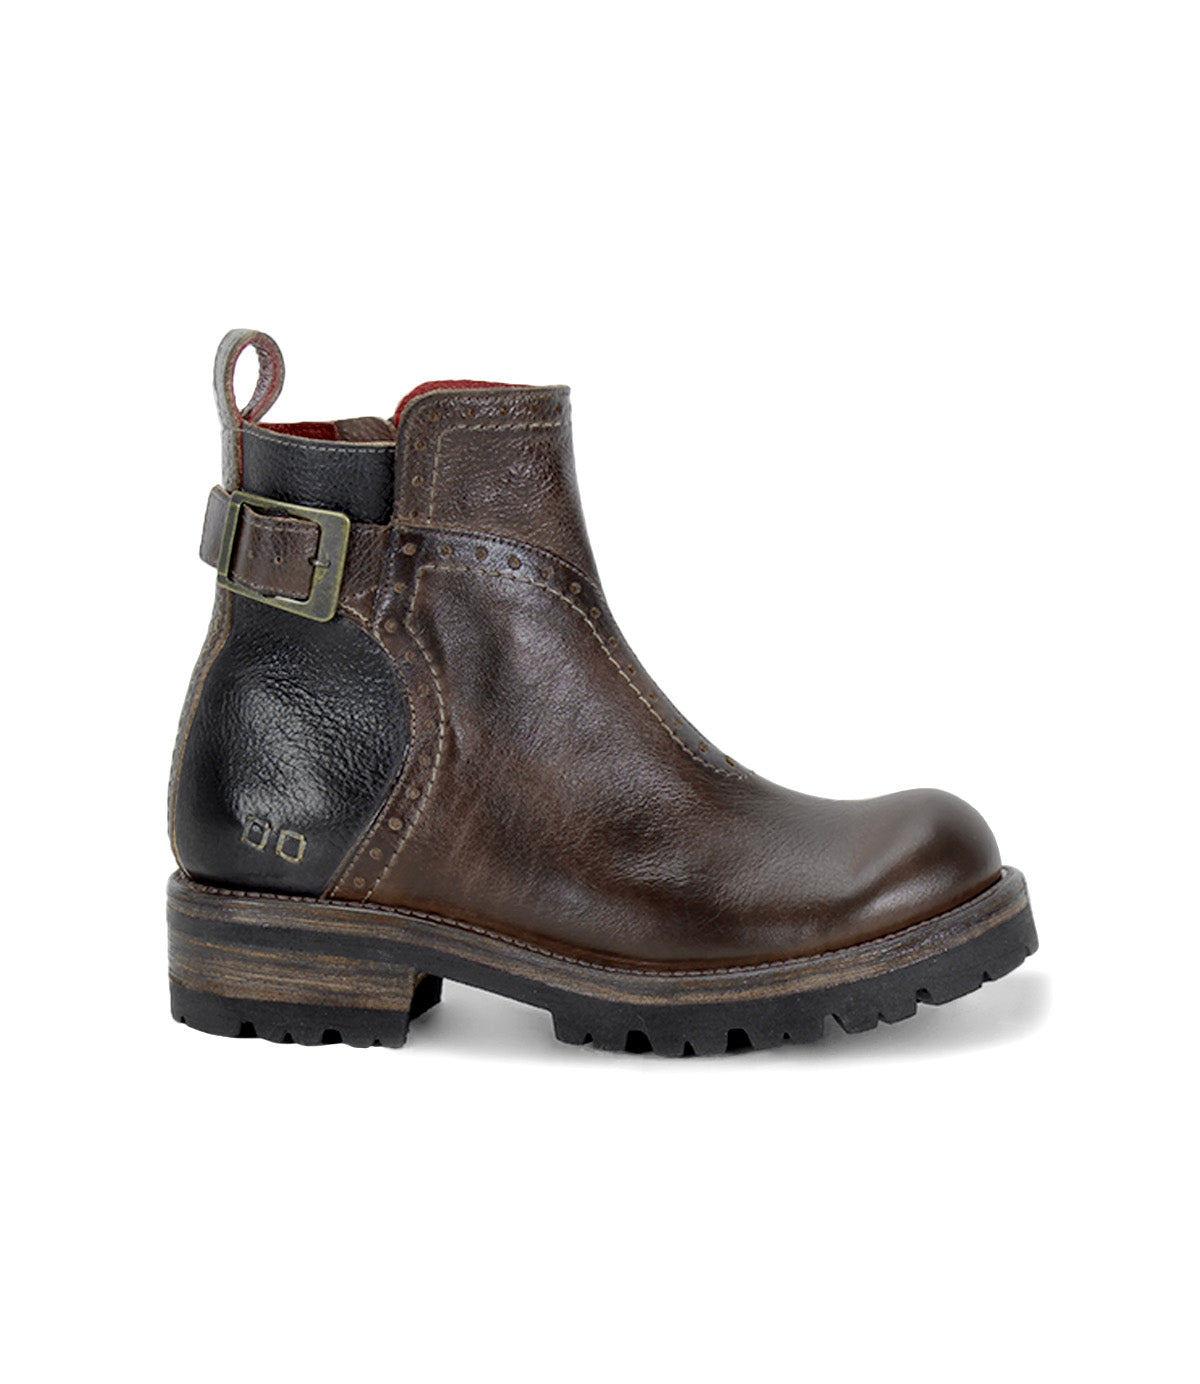 Women's brown leather ankle boots with buckles, called the Brianna by Bed Stu.